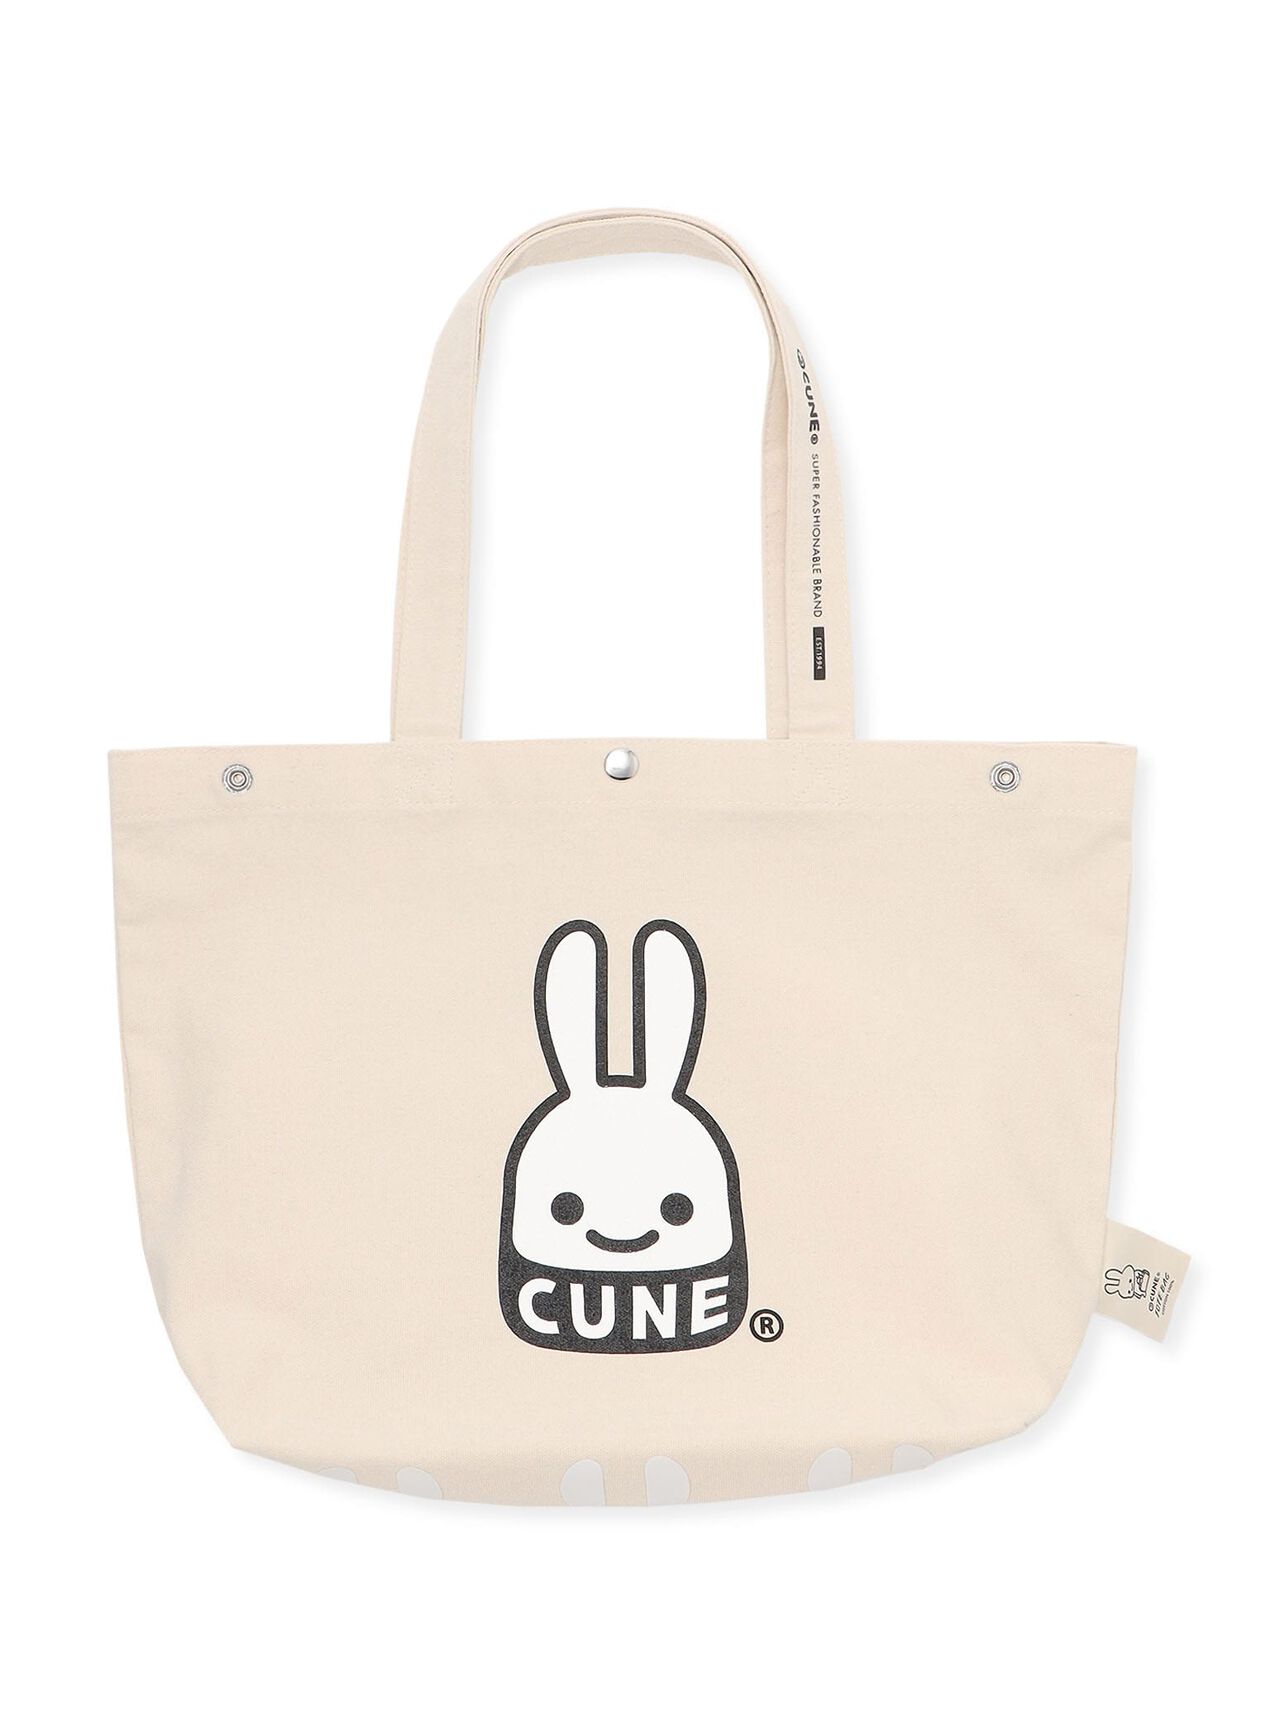 Basic Cotton Tote Bag CUNE Rabbit,ONE, large image number 0